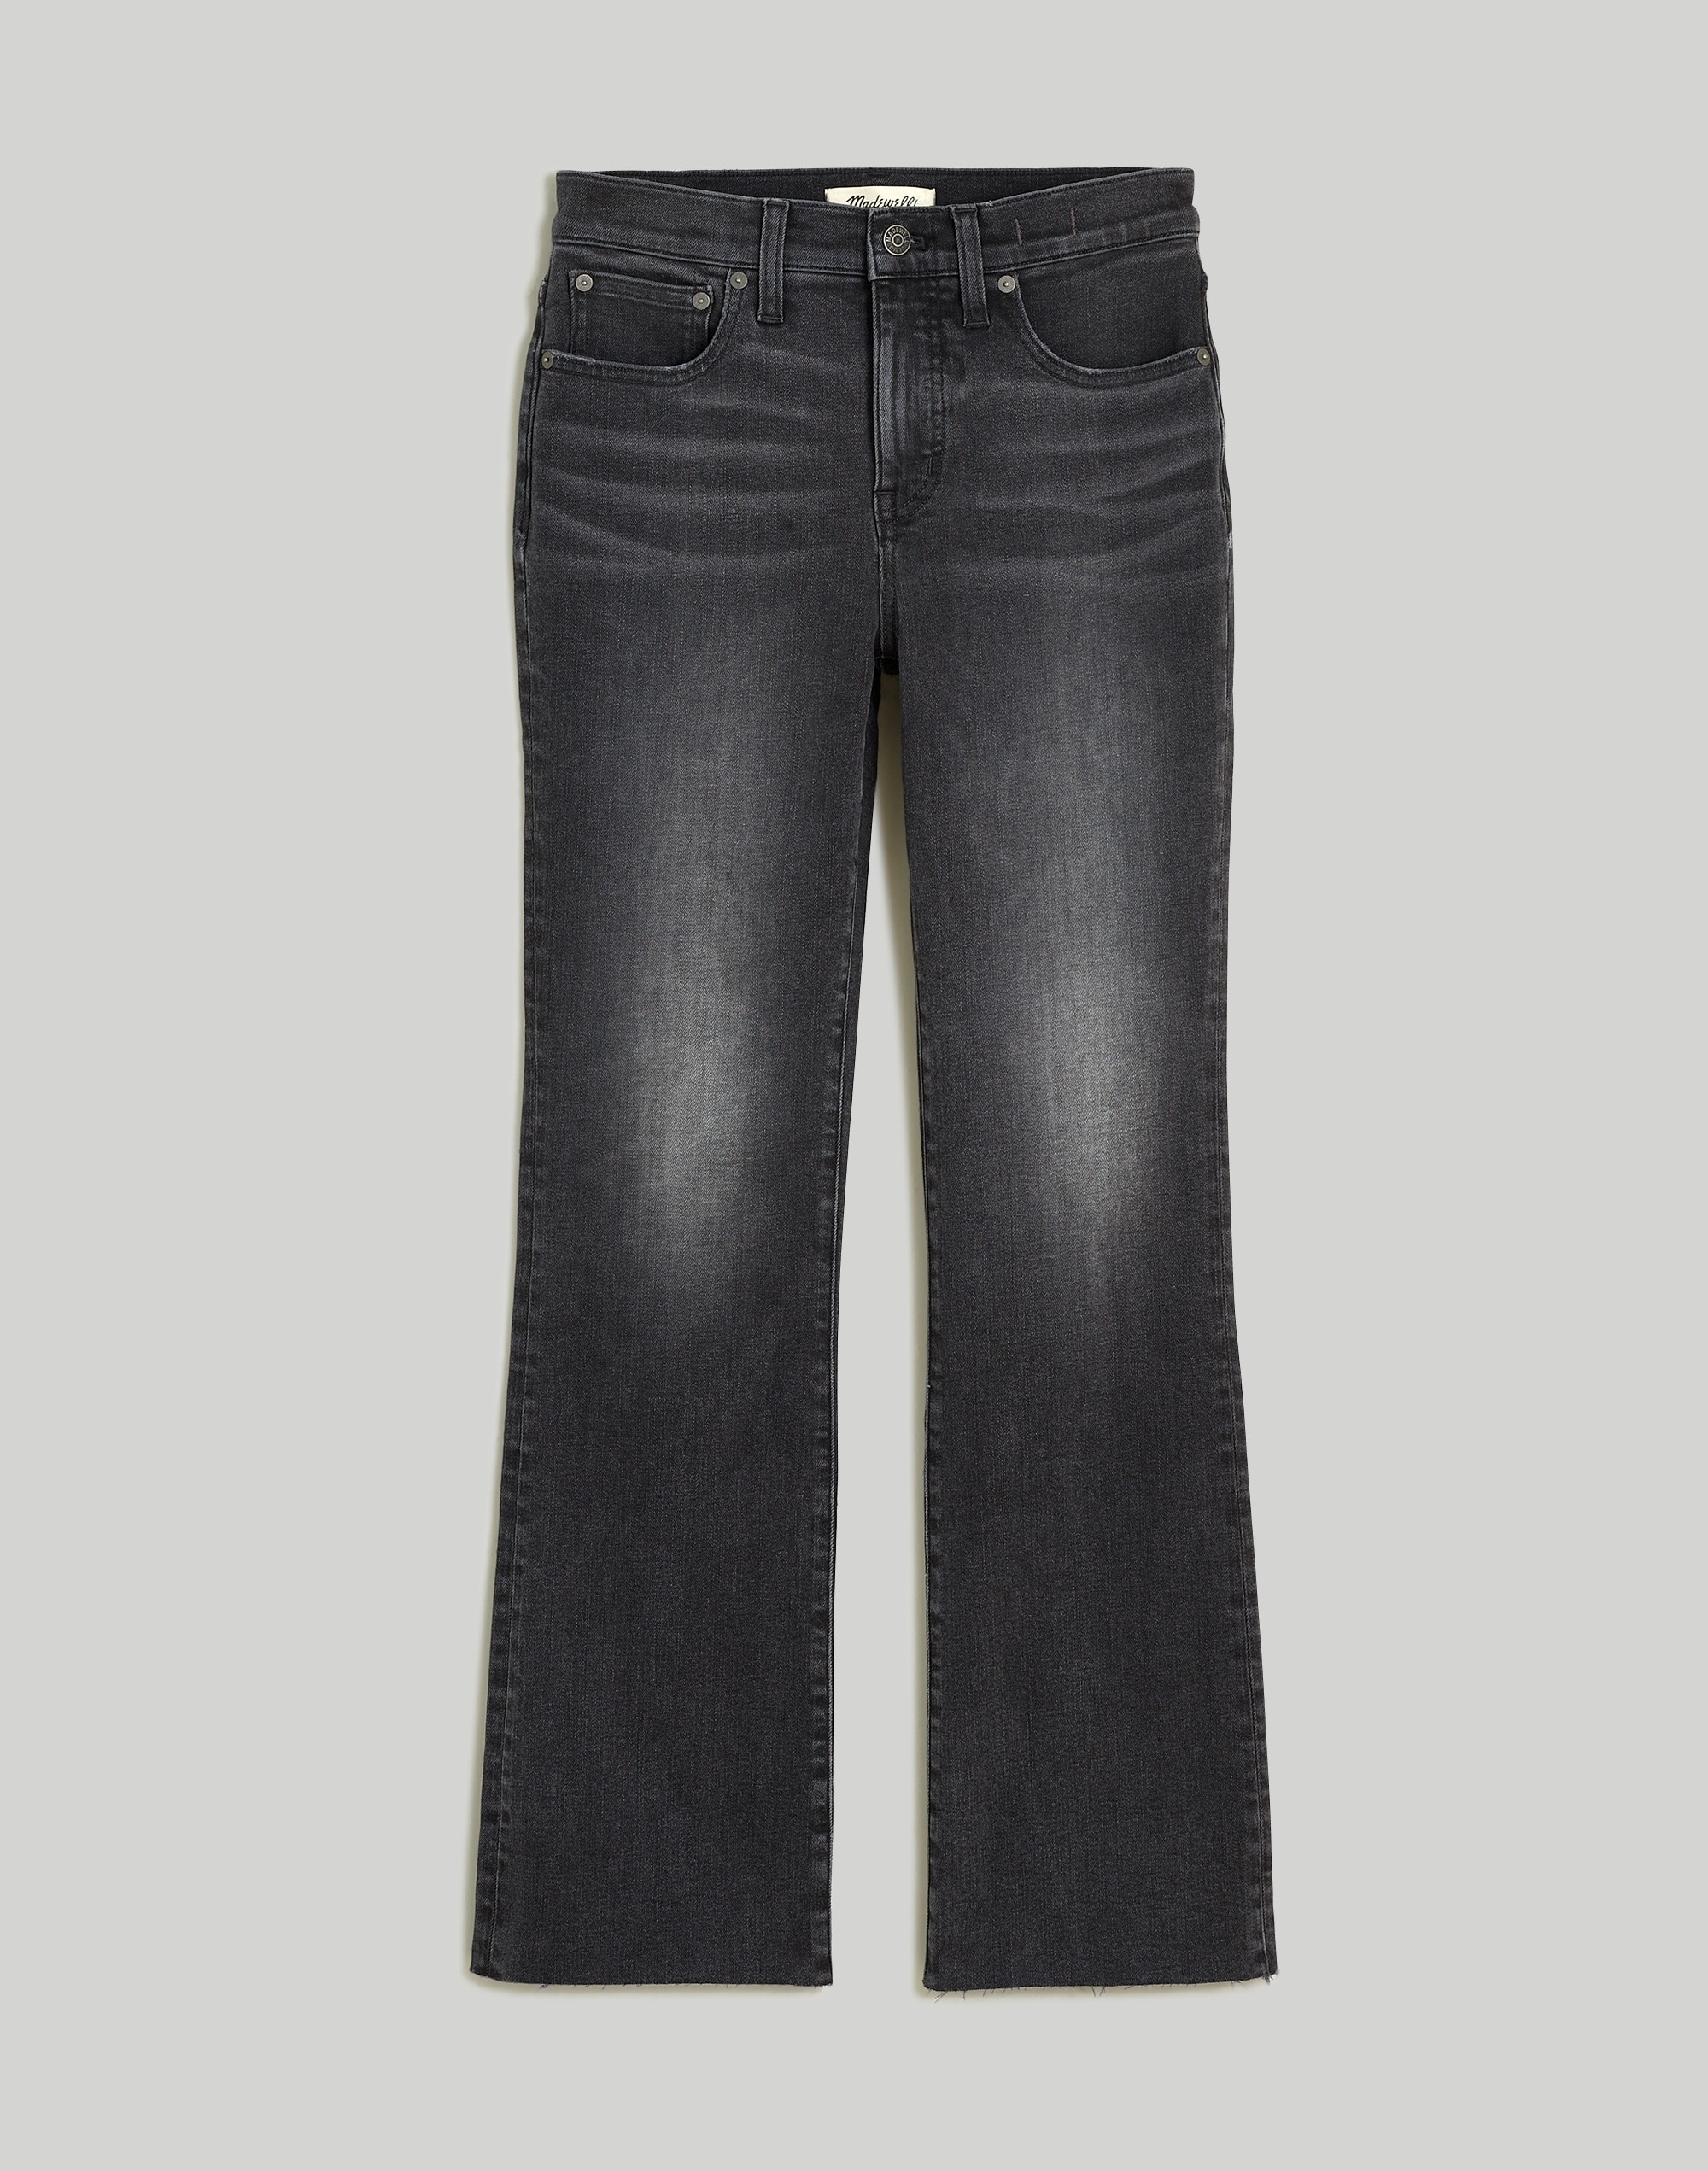 90s High-Rise Bootcut Jeans in Lindale Wash